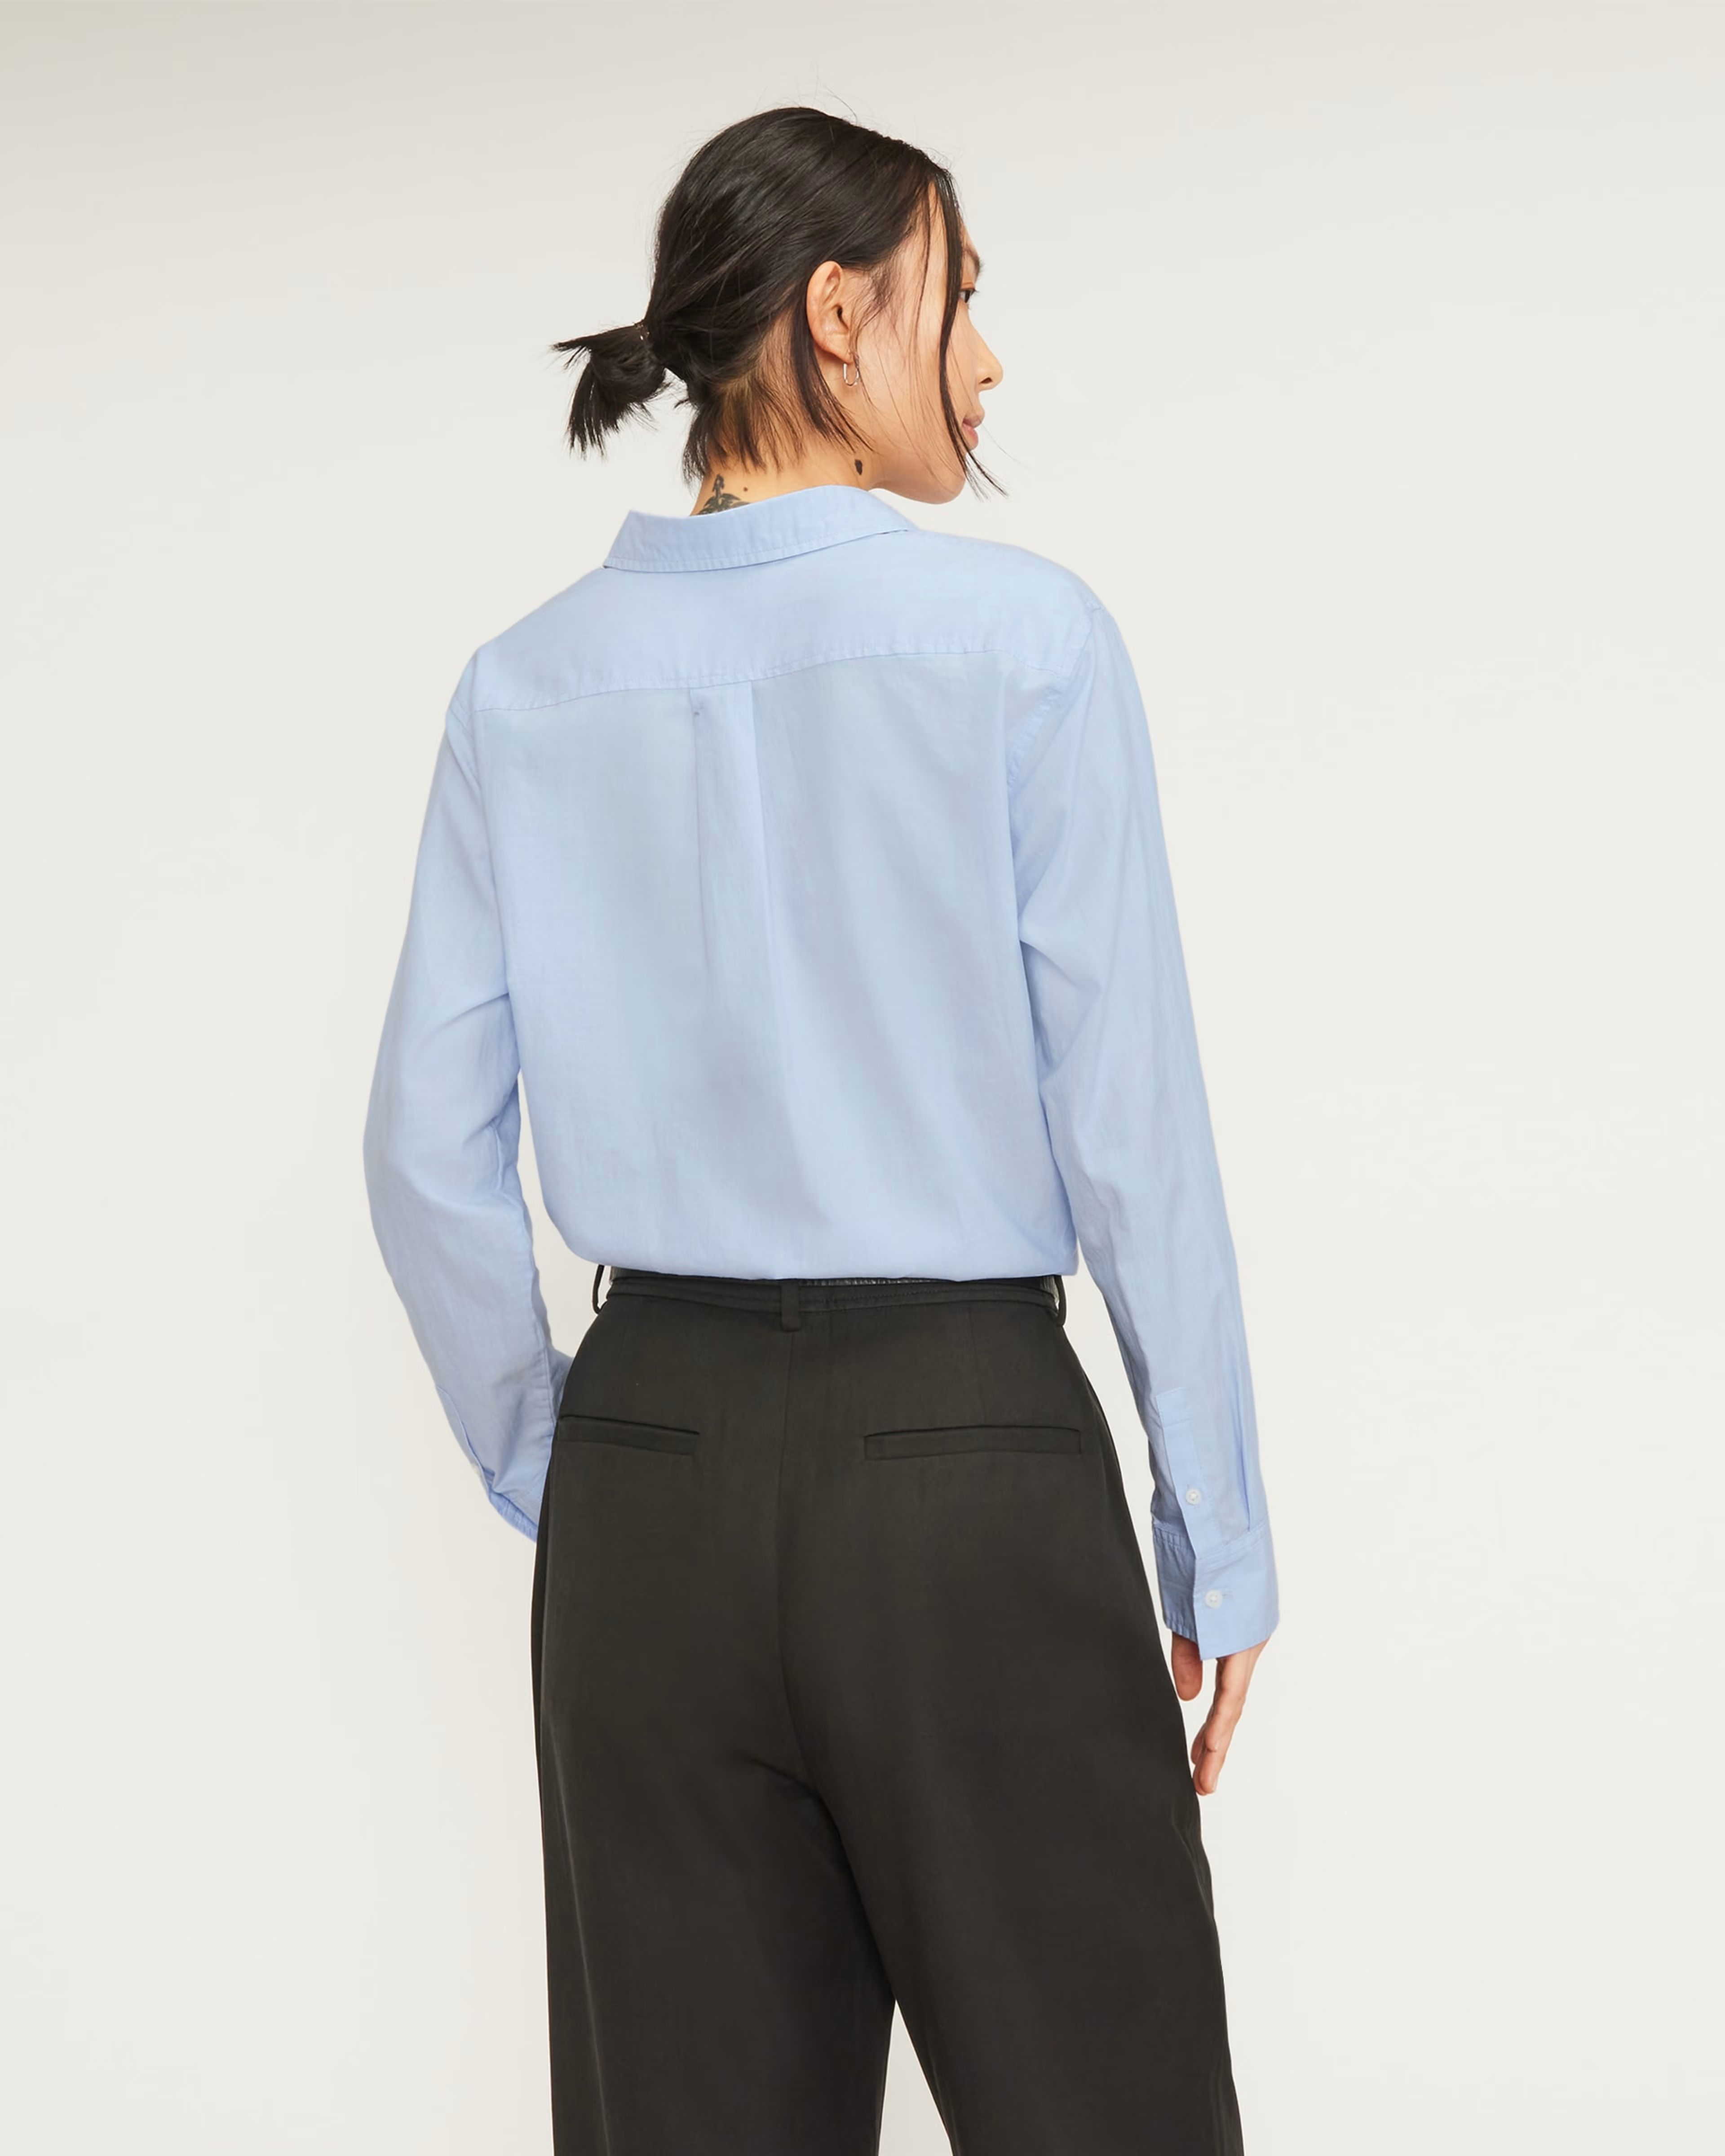 The Silky Cotton Relaxed Shirt | Everlane